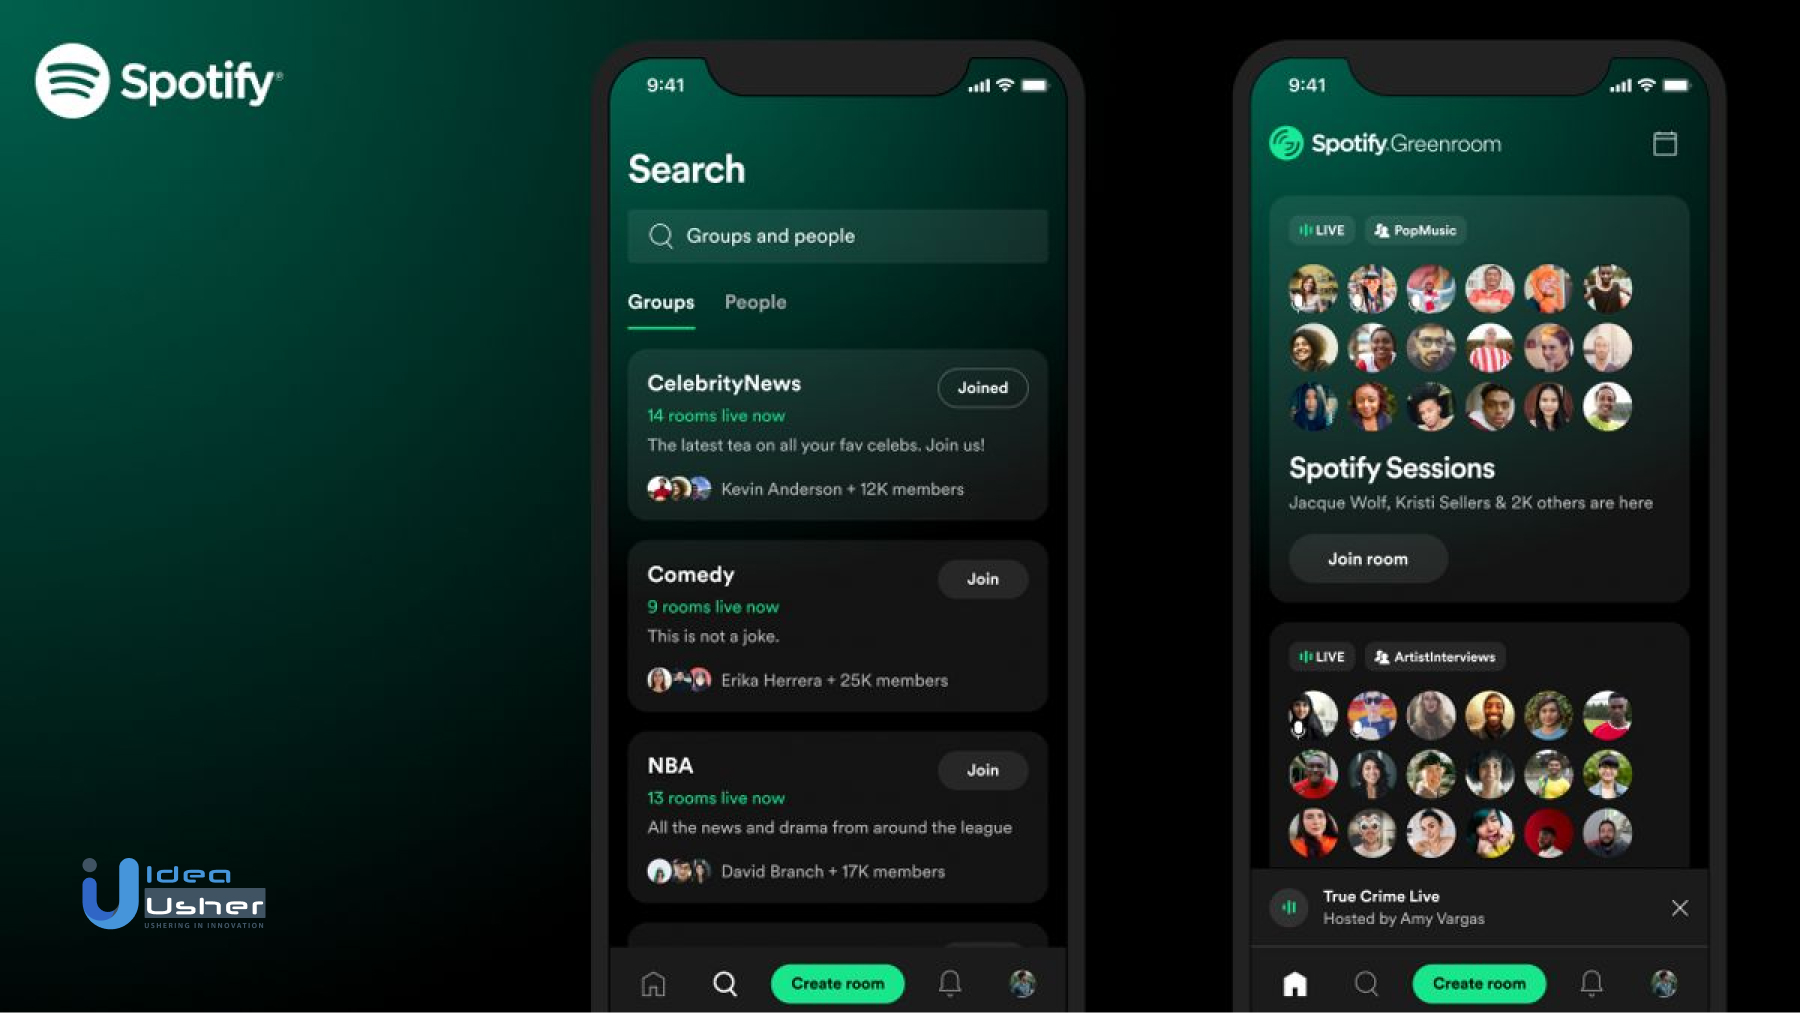 spotify greenroom app features